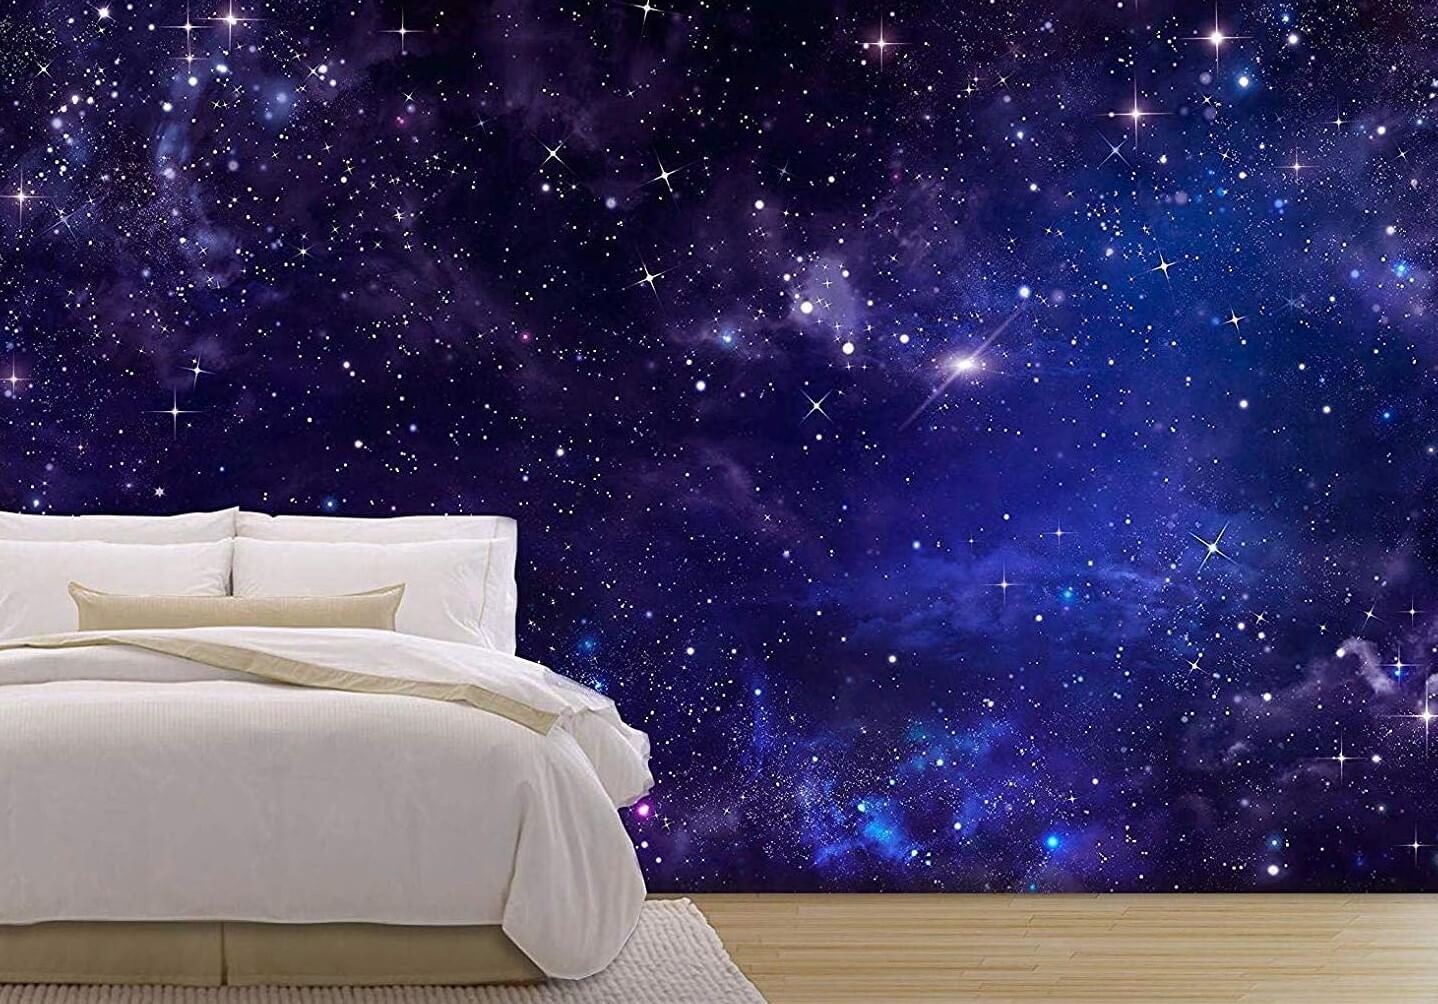 wall mural showing the night sky